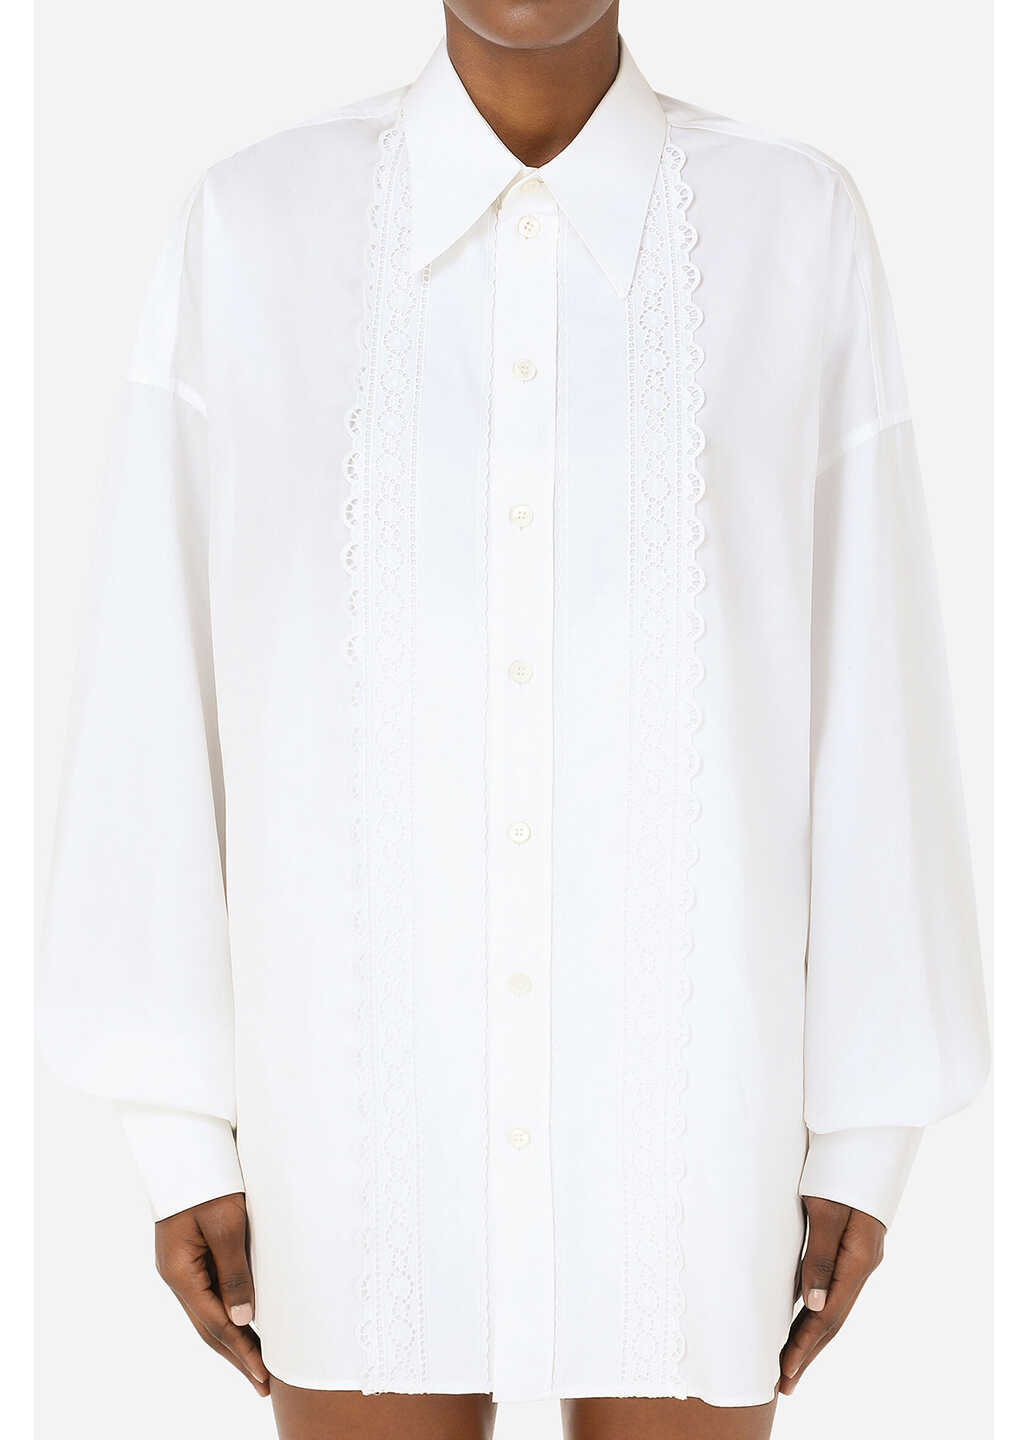 Dolce & Gabbana Broderie Anglaise Detailing Shirt White image0